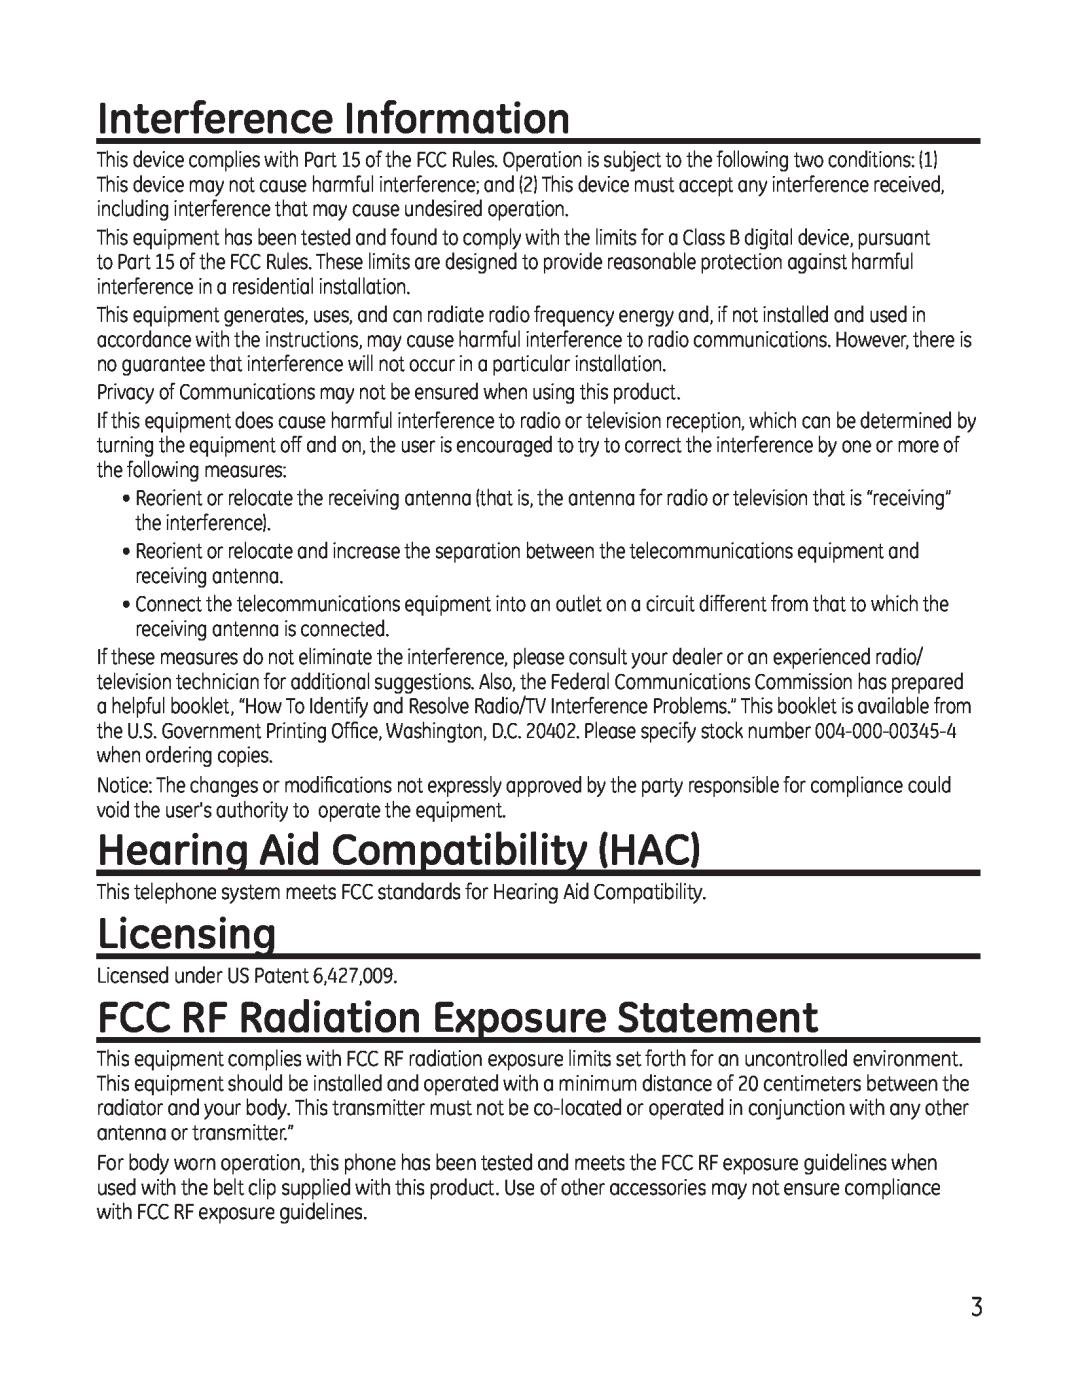 GE 25865 manual Interference Information, Hearing Aid Compatibility HAC, Licensing, FCC RF Radiation Exposure Statement 